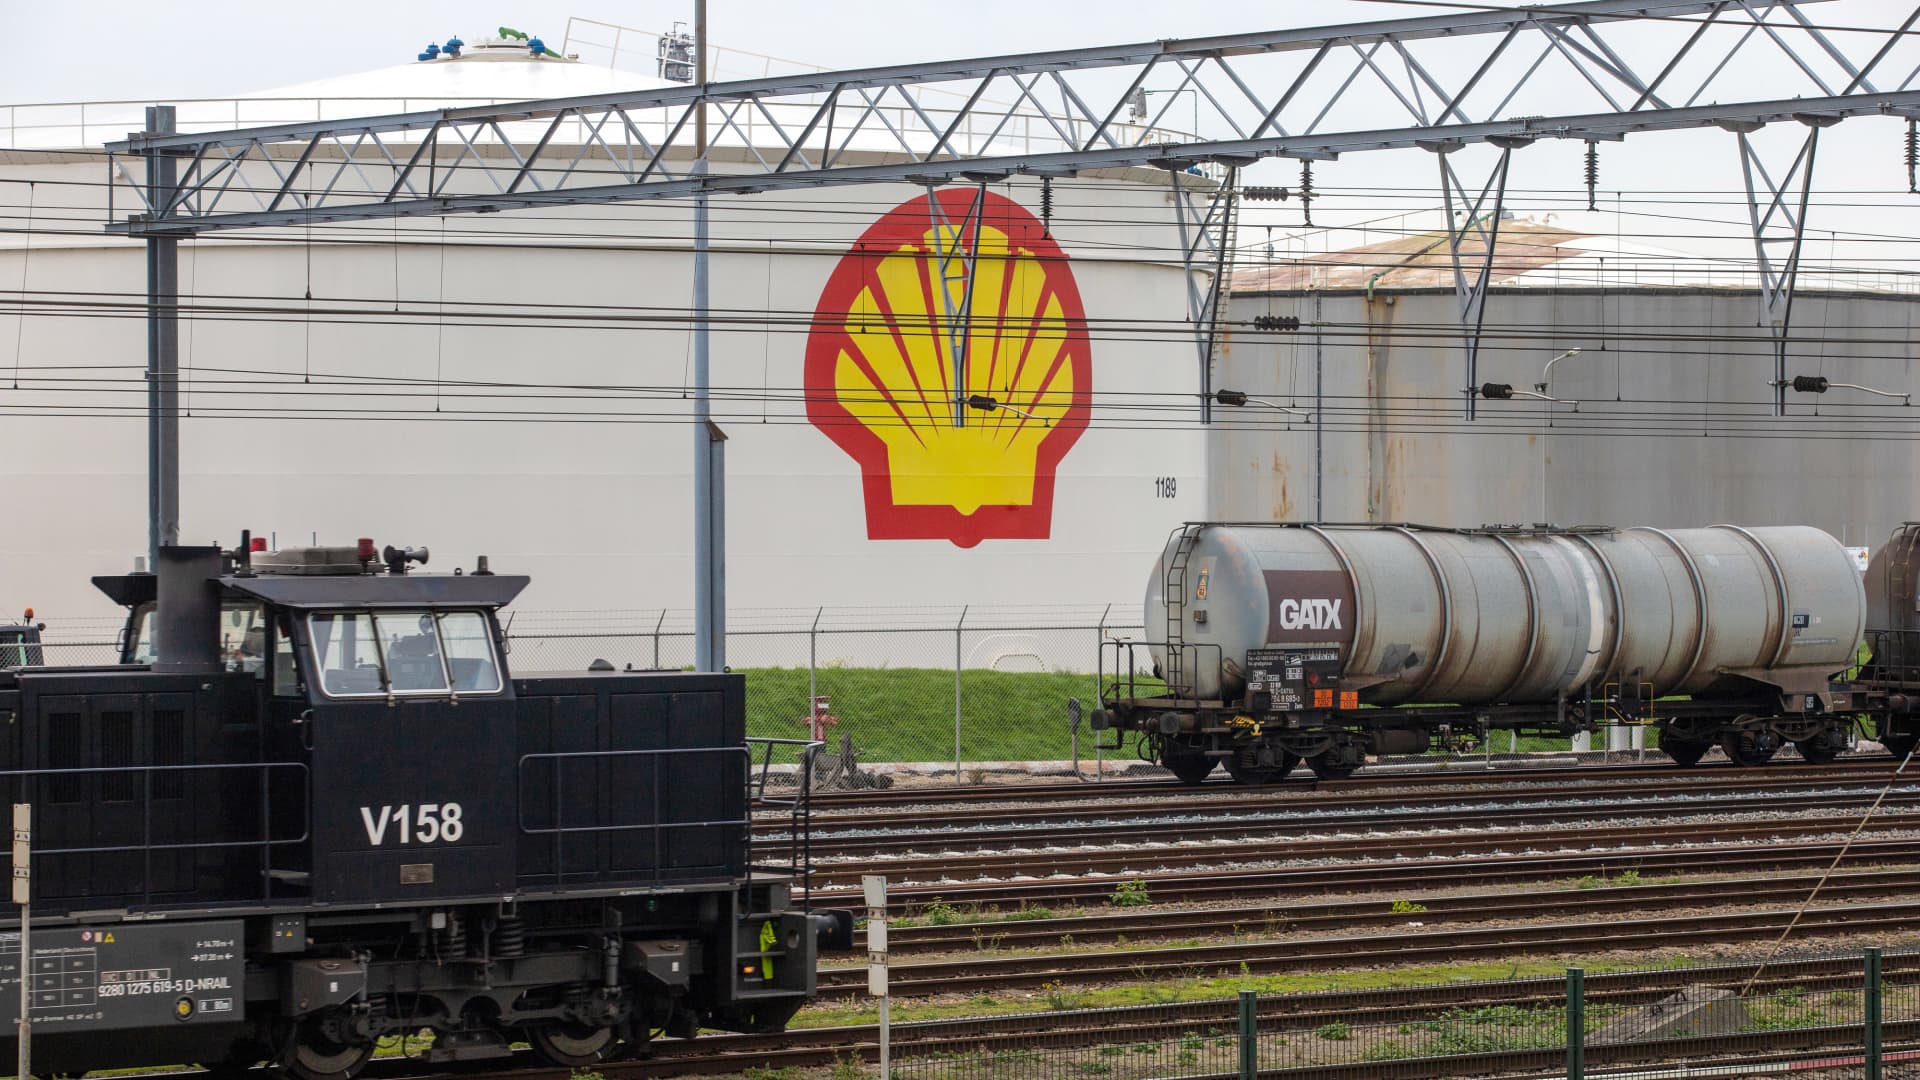 What Wall Street is expecting from Shell, TotalEnergies and BP earnings